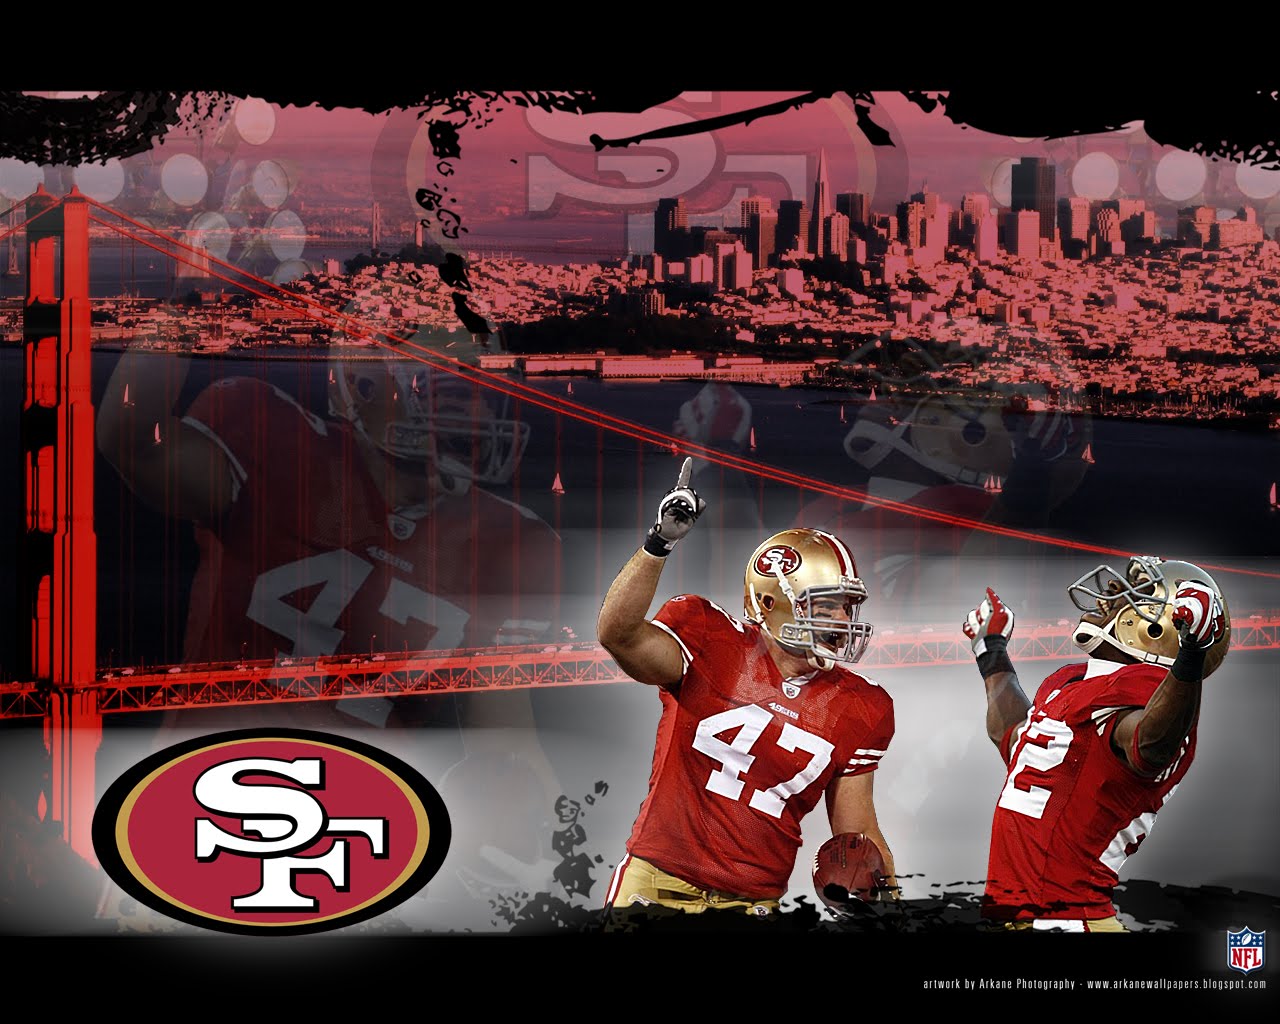 New San Francisco 49ers background San Francisco 49ers wallpapers 1280x1024